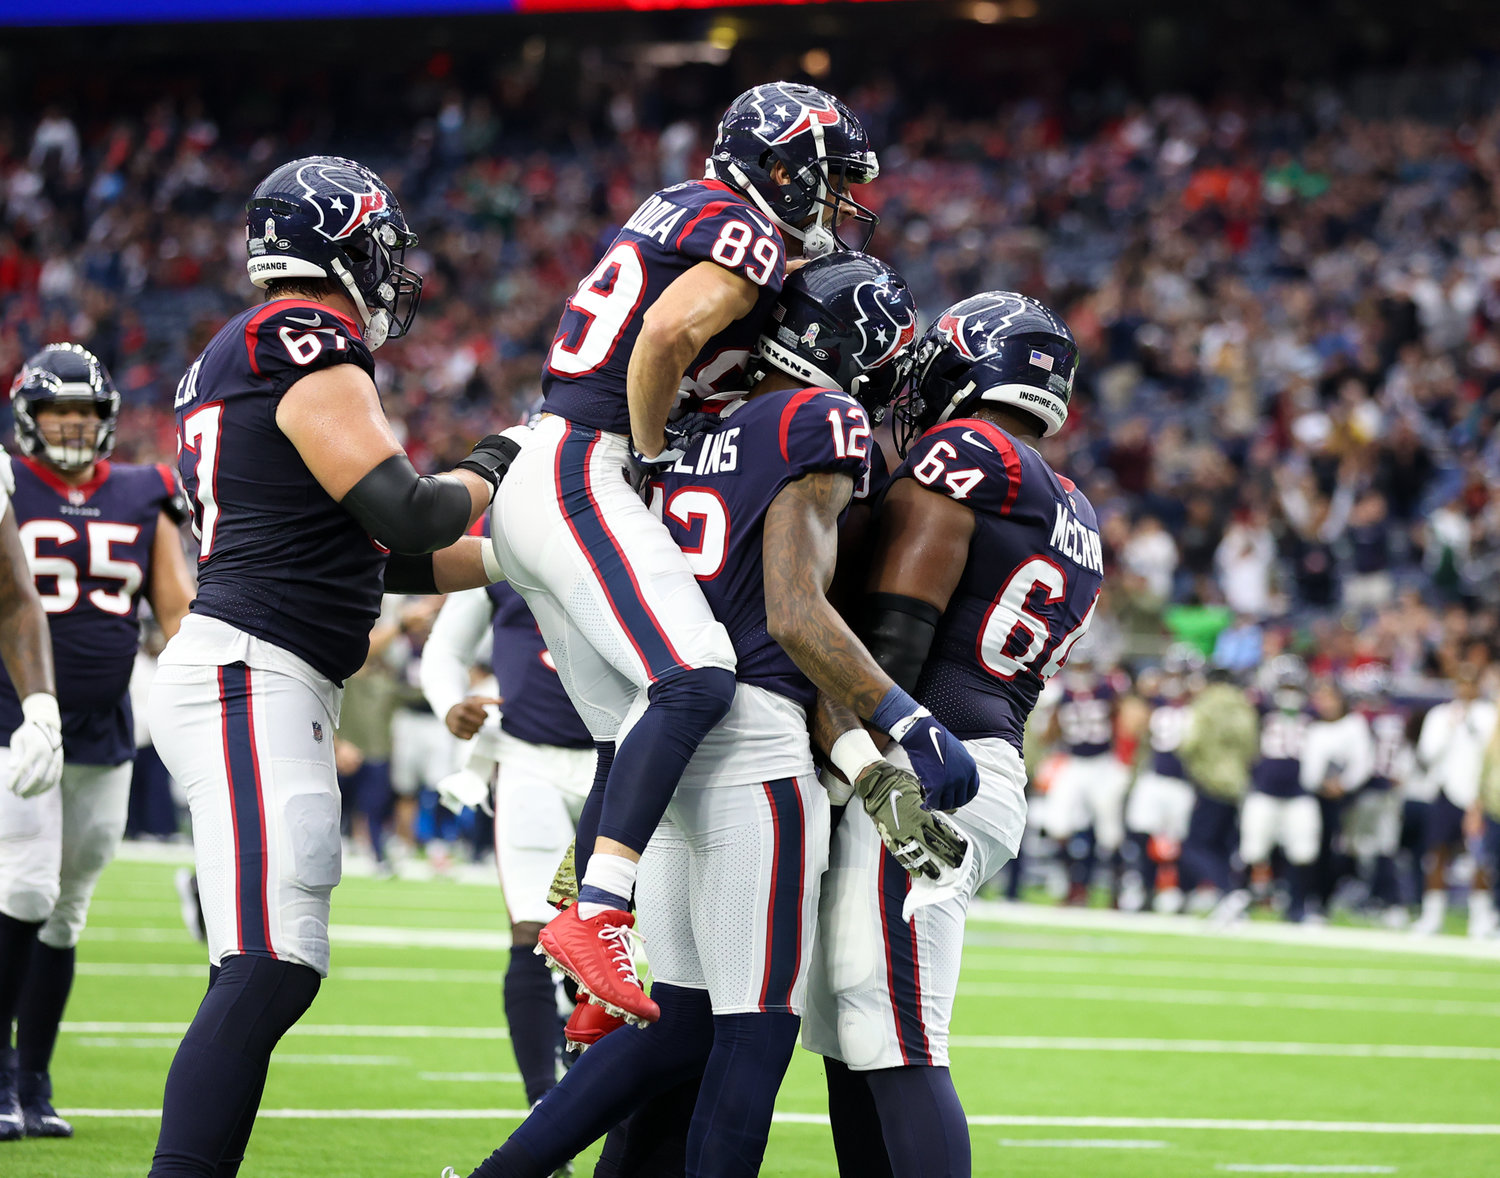 The Houston Texans celebrate a touchdown during an NFL game between the Houston Texans and the New York Jets on November 28, 2021 in Houston, Texas.